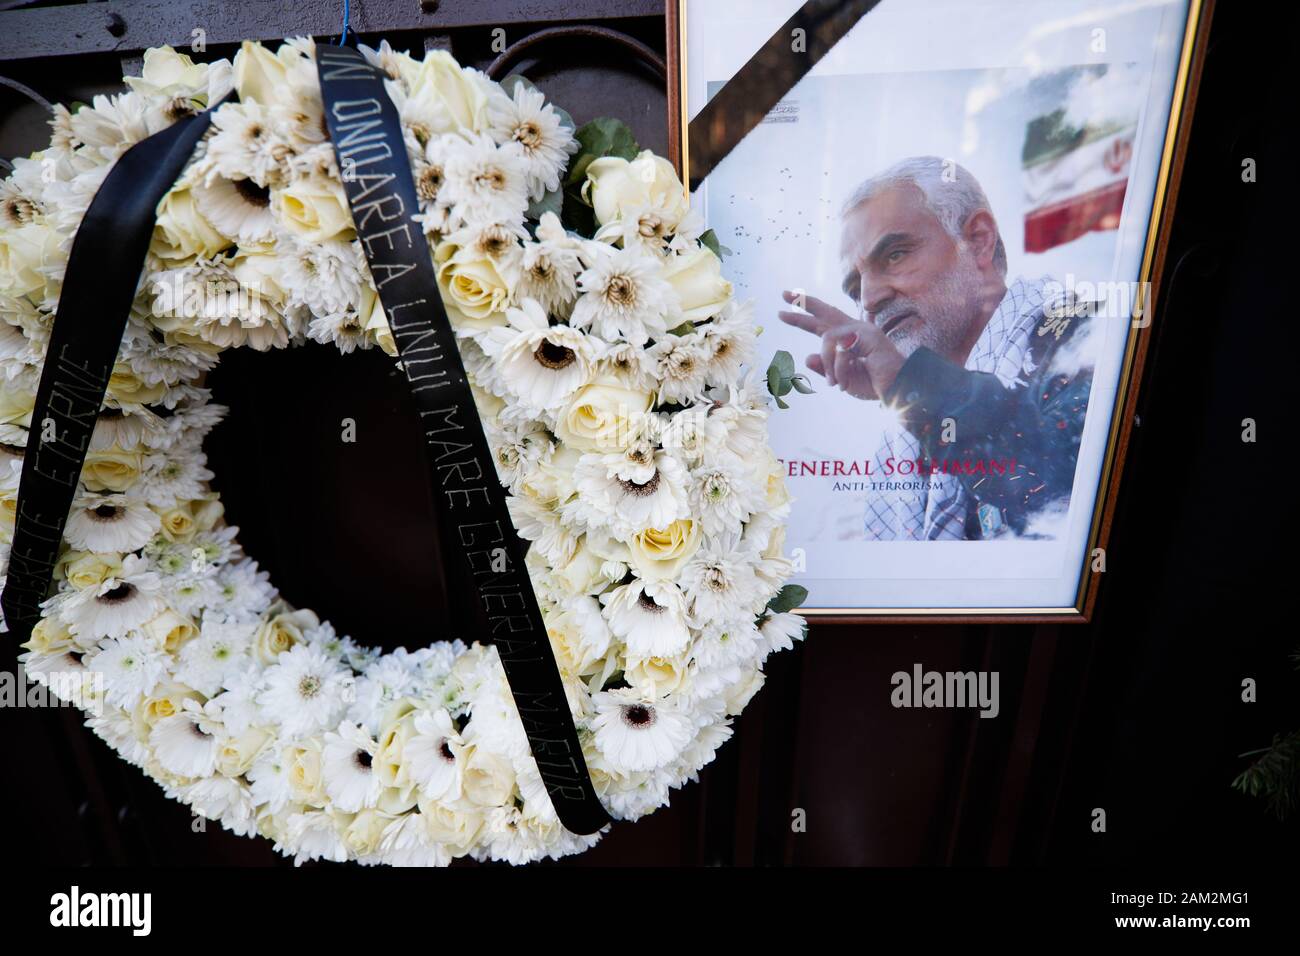 Bucharest, Romania - January 10, 2020: Picture showing iranian general Qassim Soleimani and flowers at the Iranian embassy in Bucharest. Stock Photo